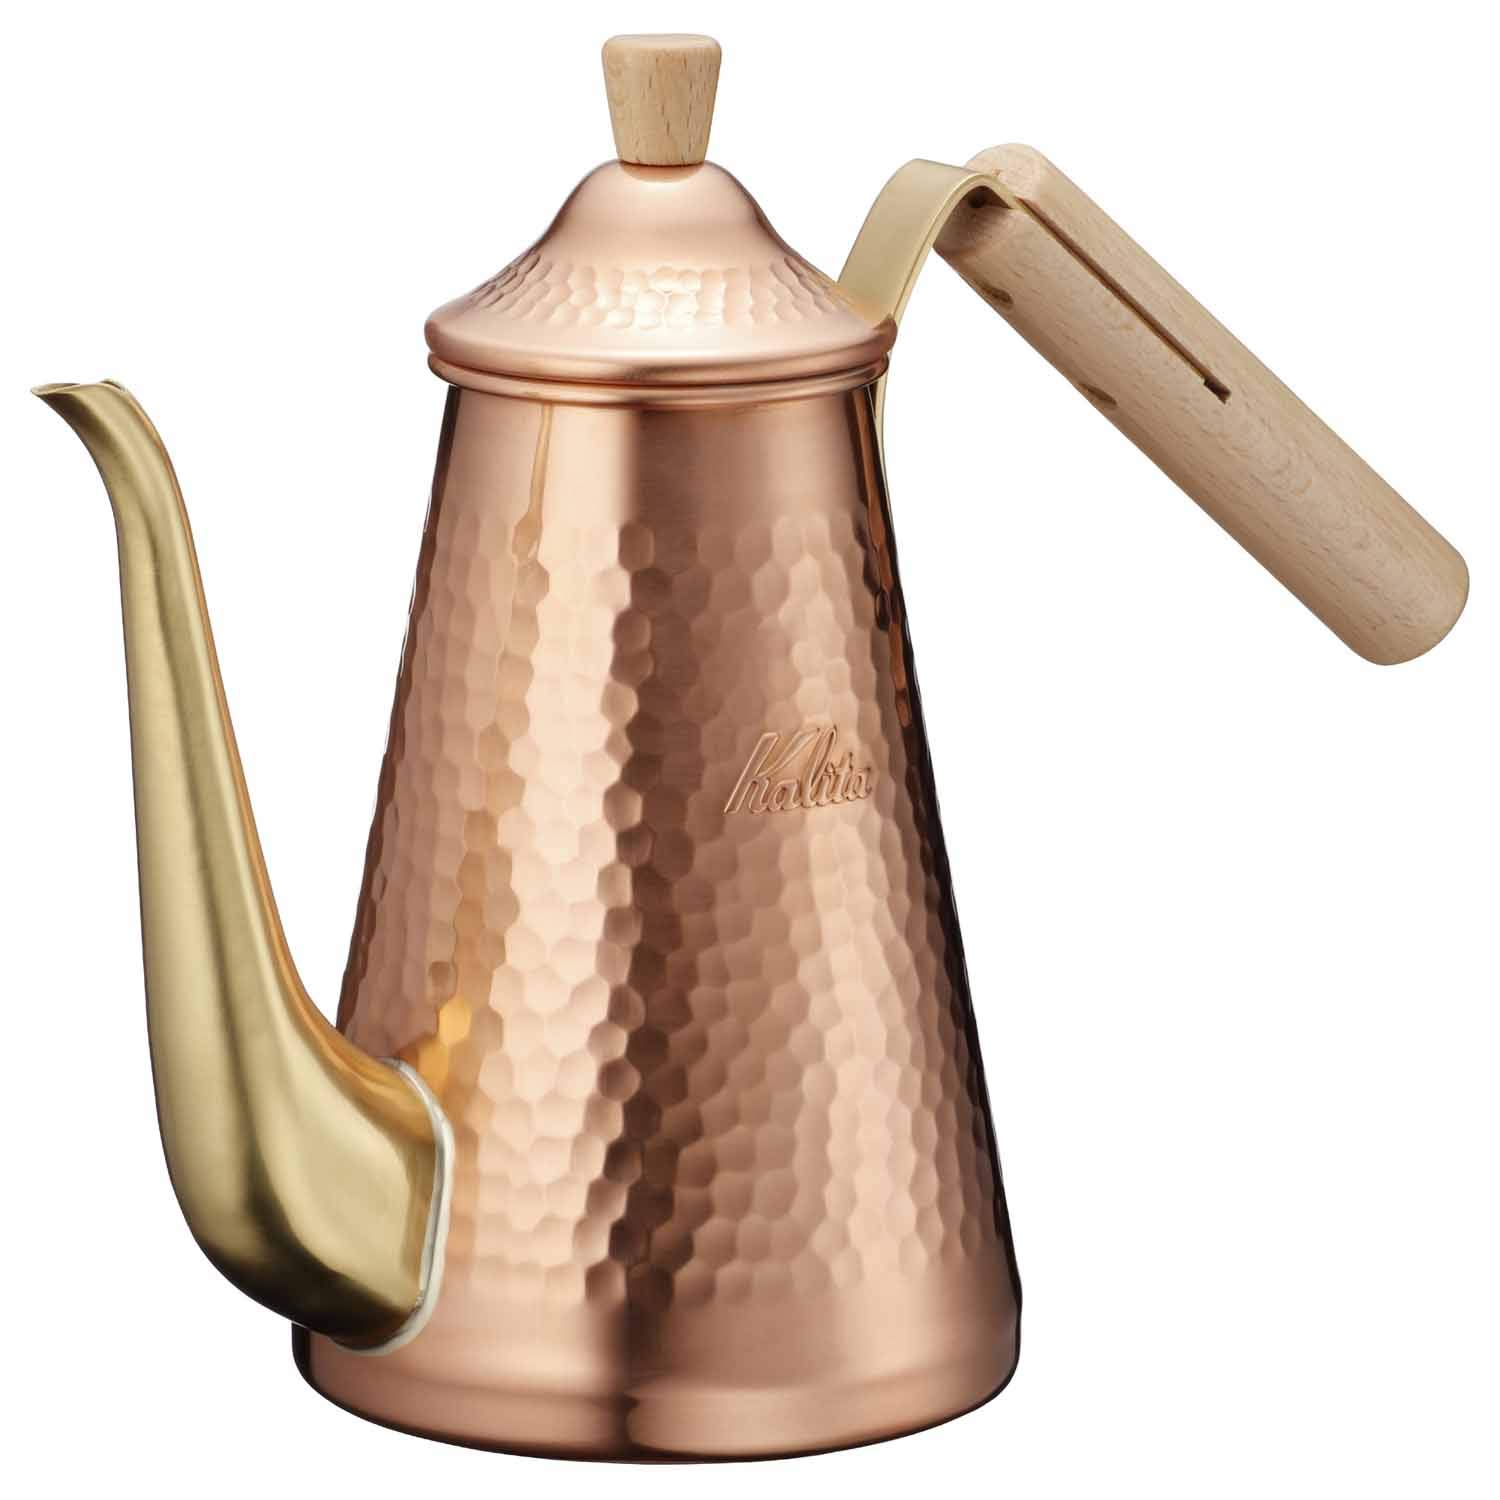 Kalita TSUBAME&Kalita #52204 Drip Pot, Coffee Pot, Narrow Mouth, Copper, Wooden Handle Handle, 0.2 gal (0.7 L), Drip Kettle, Coffee Kettle, Direct Fire, Kettle, Made in Japan, Coffee Shop, Cafe